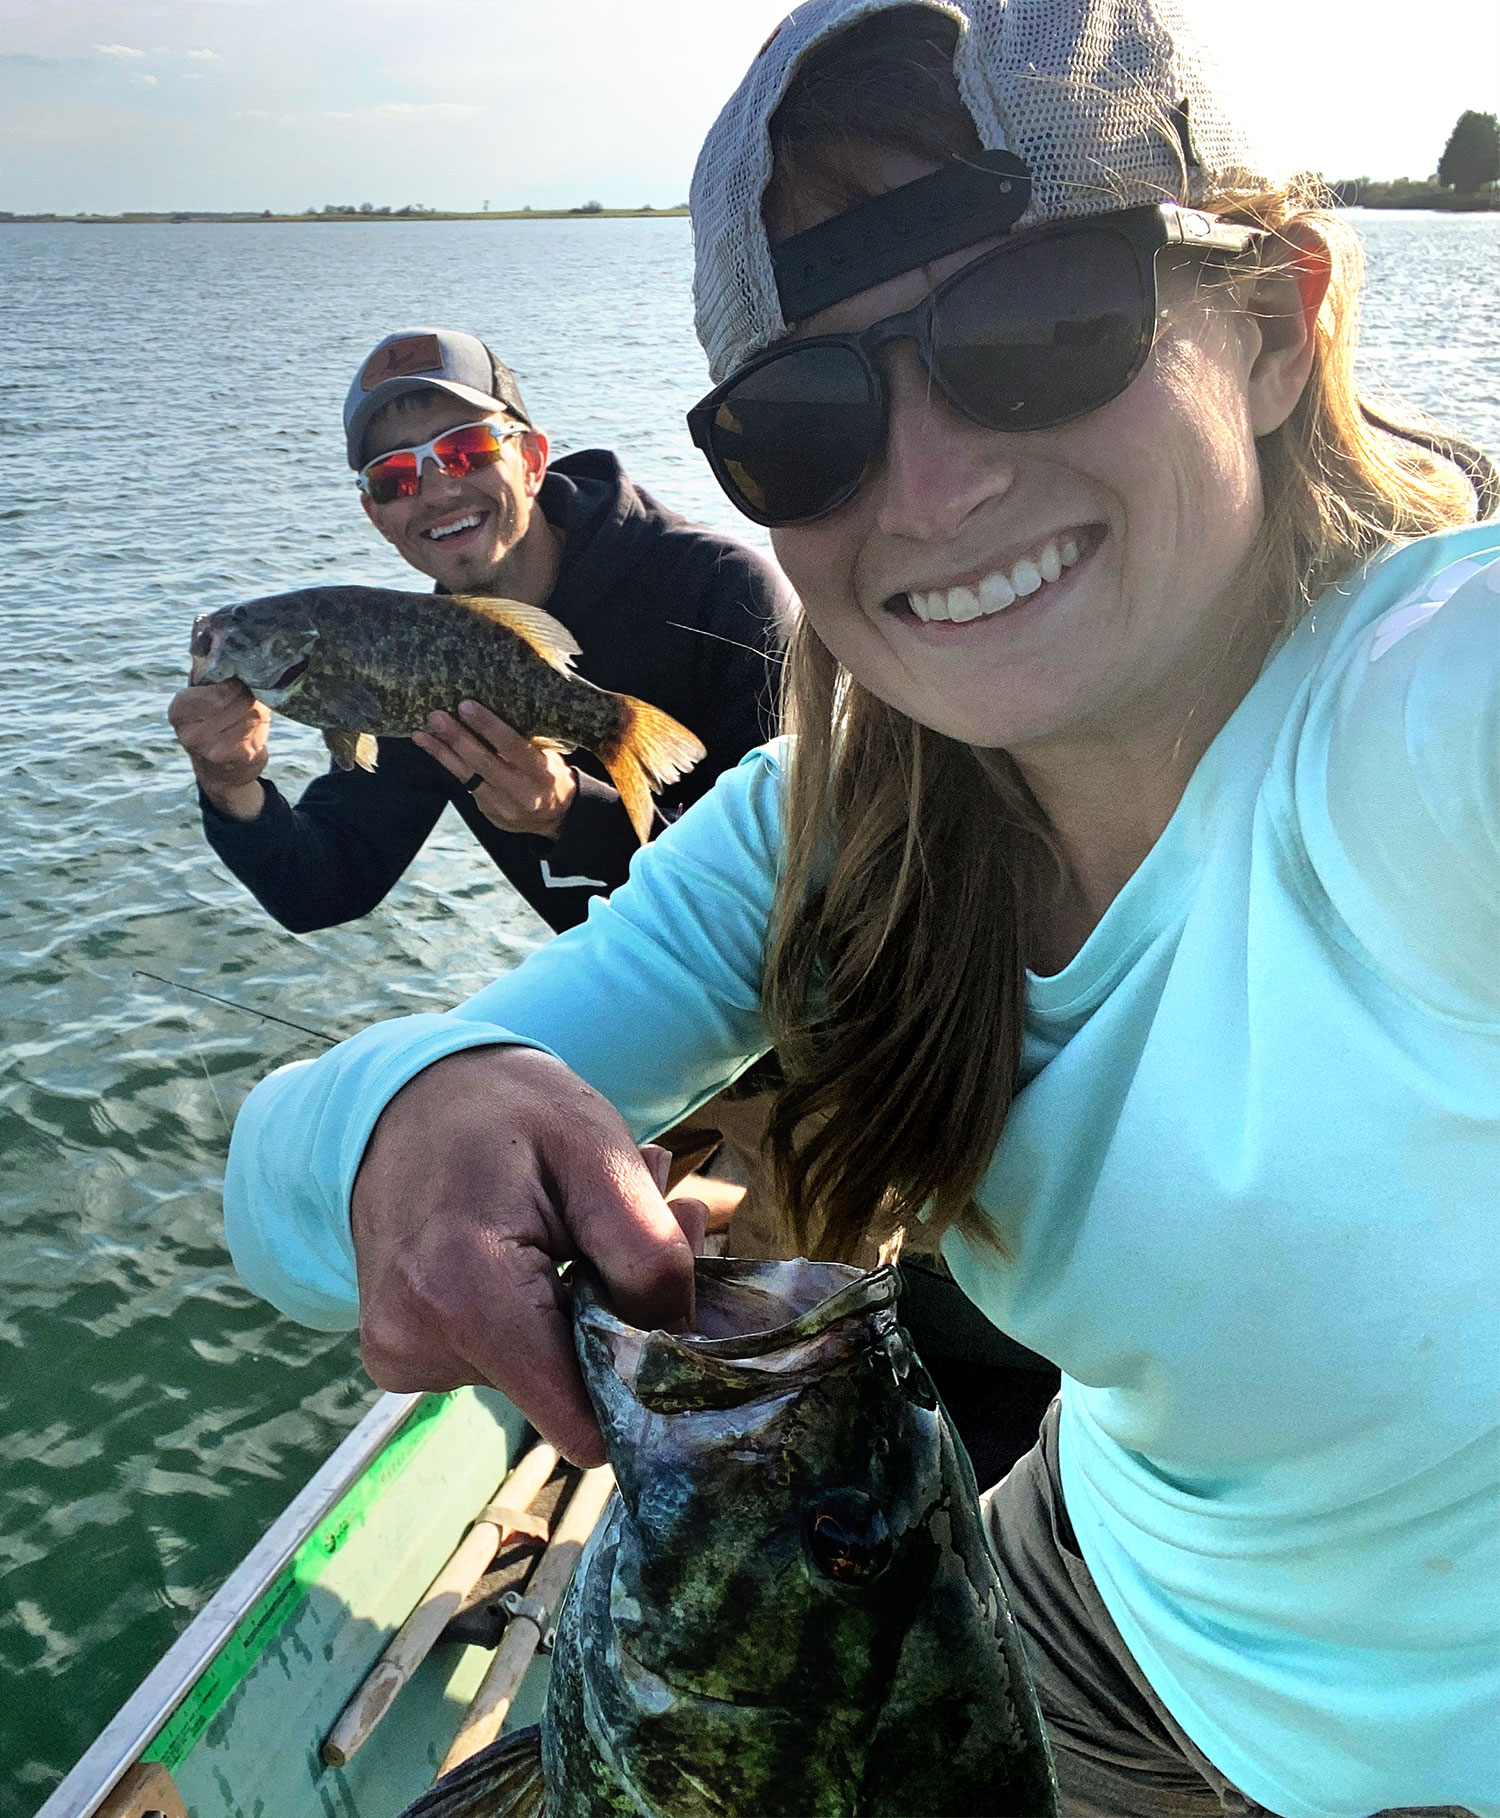 Cayla and her husband on their boat holding fish they caught